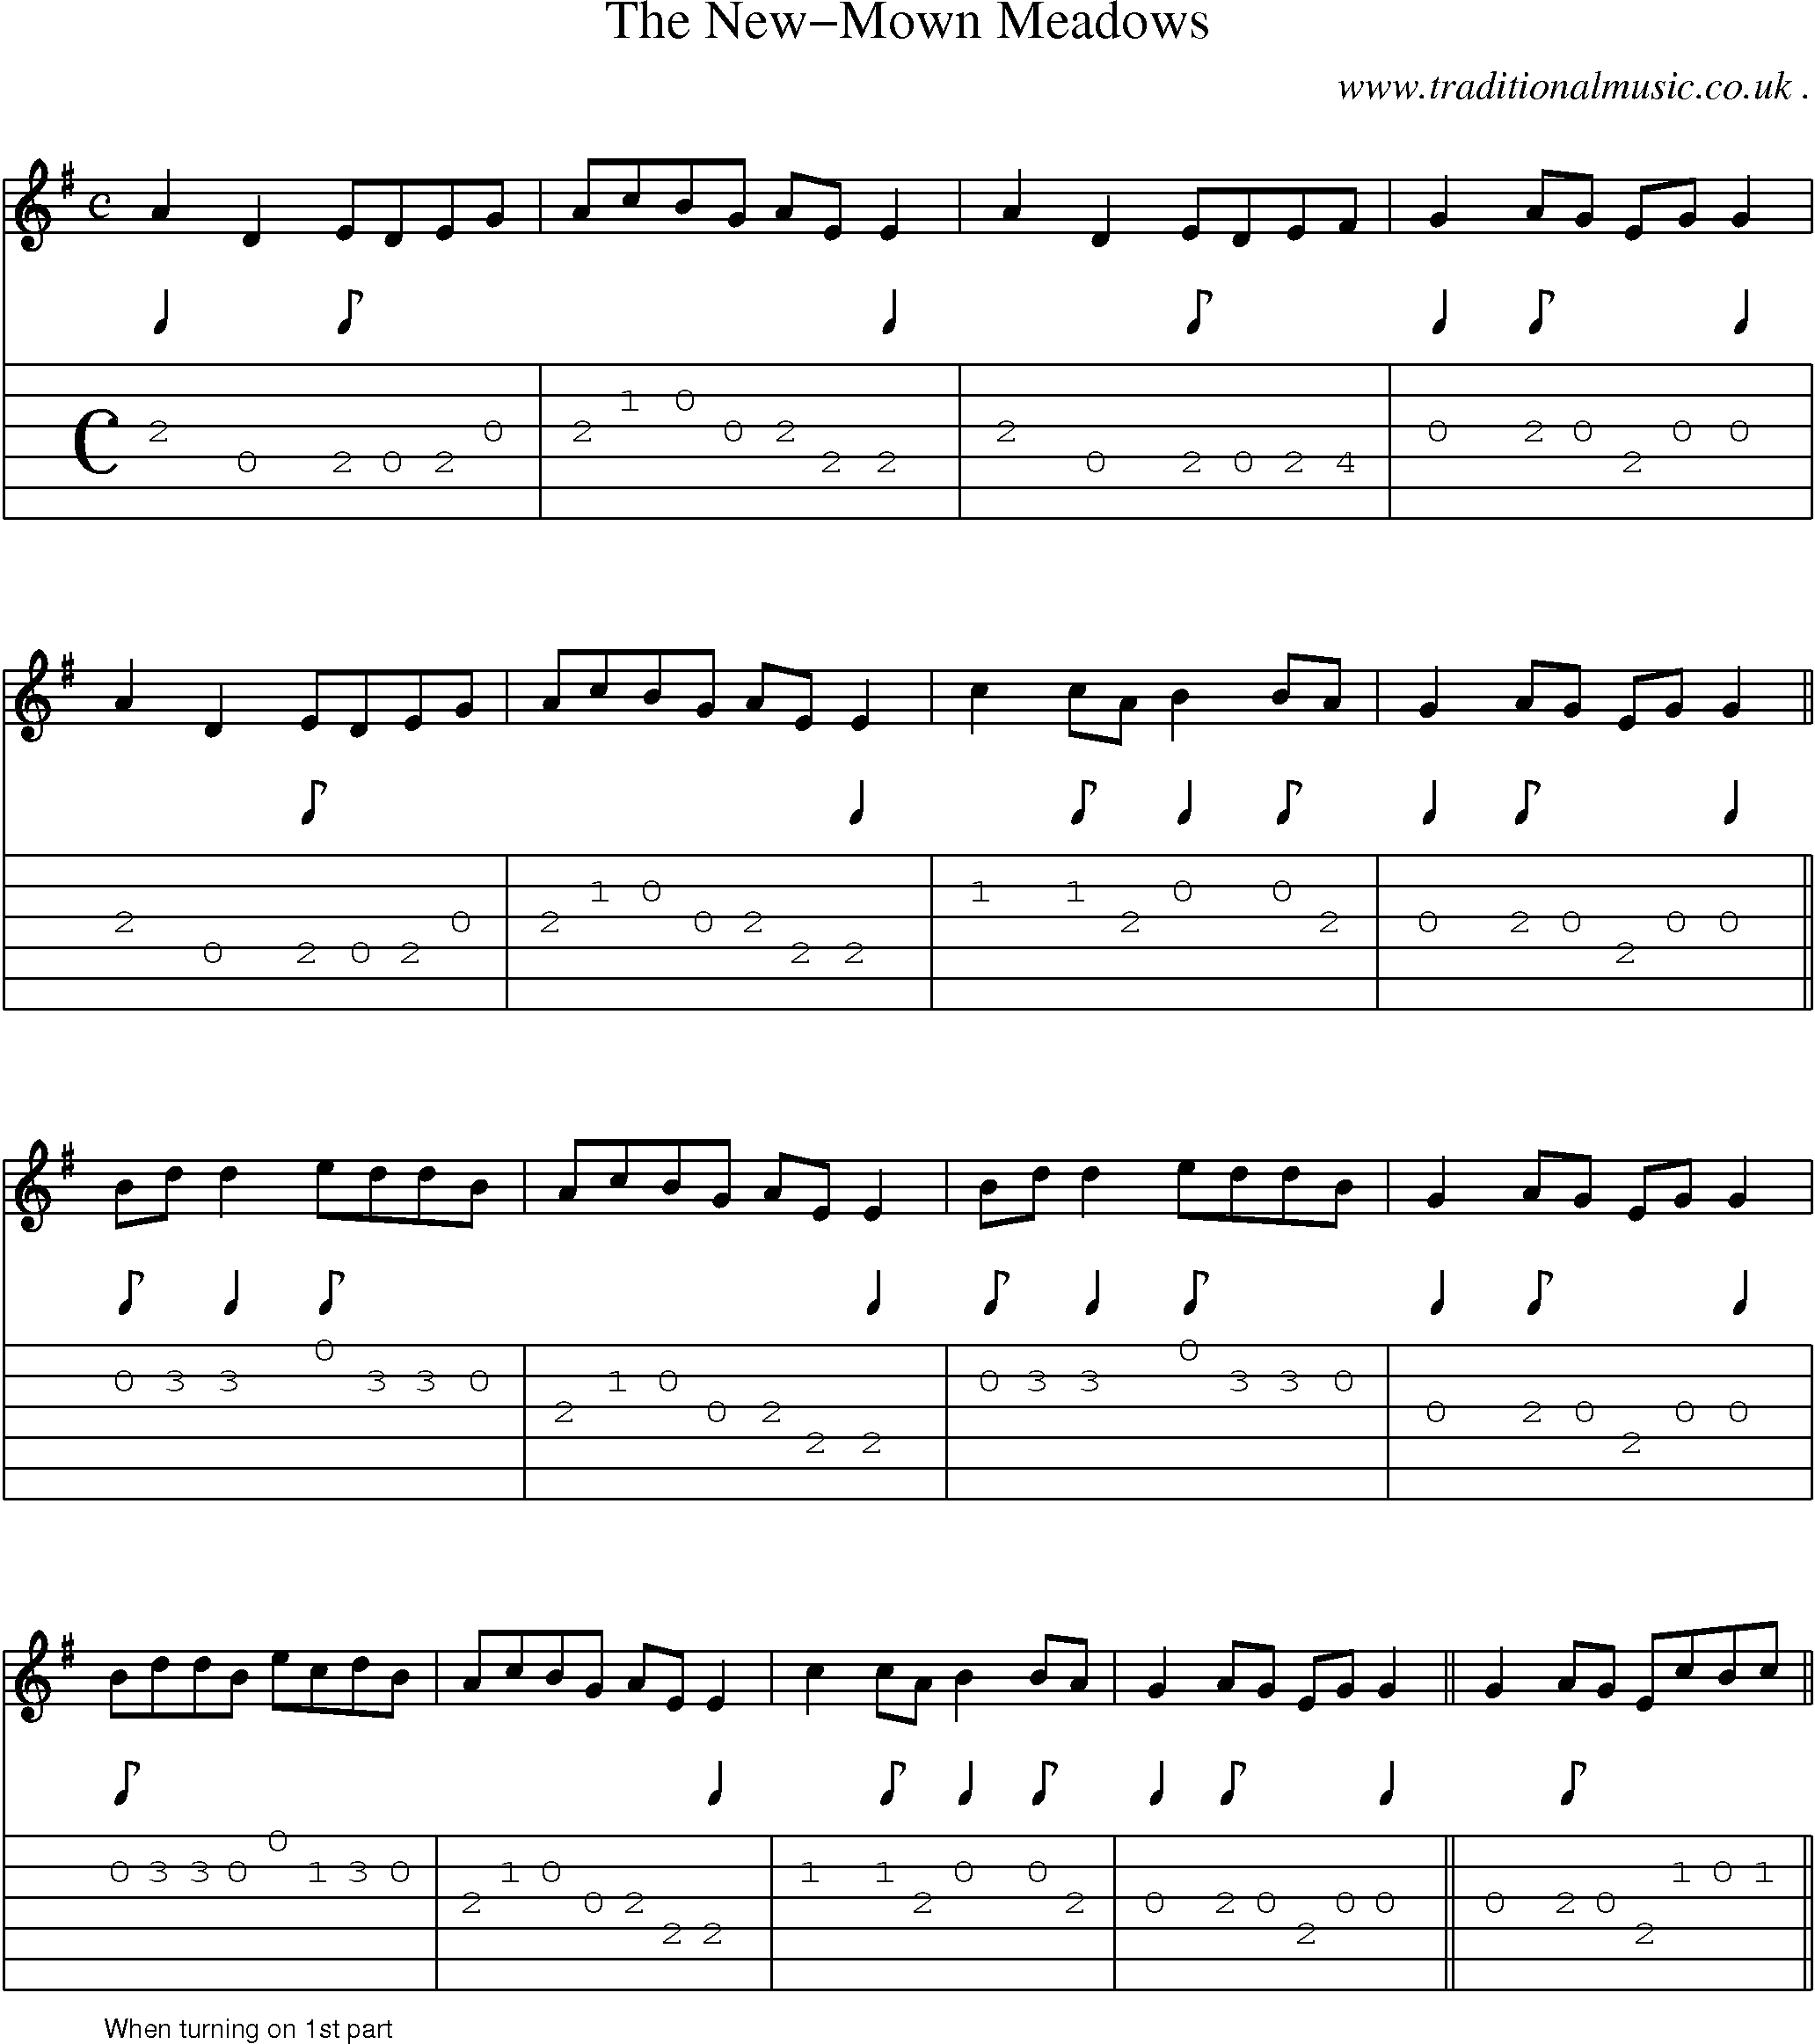 Sheet-Music and Guitar Tabs for The New-mown Meadows